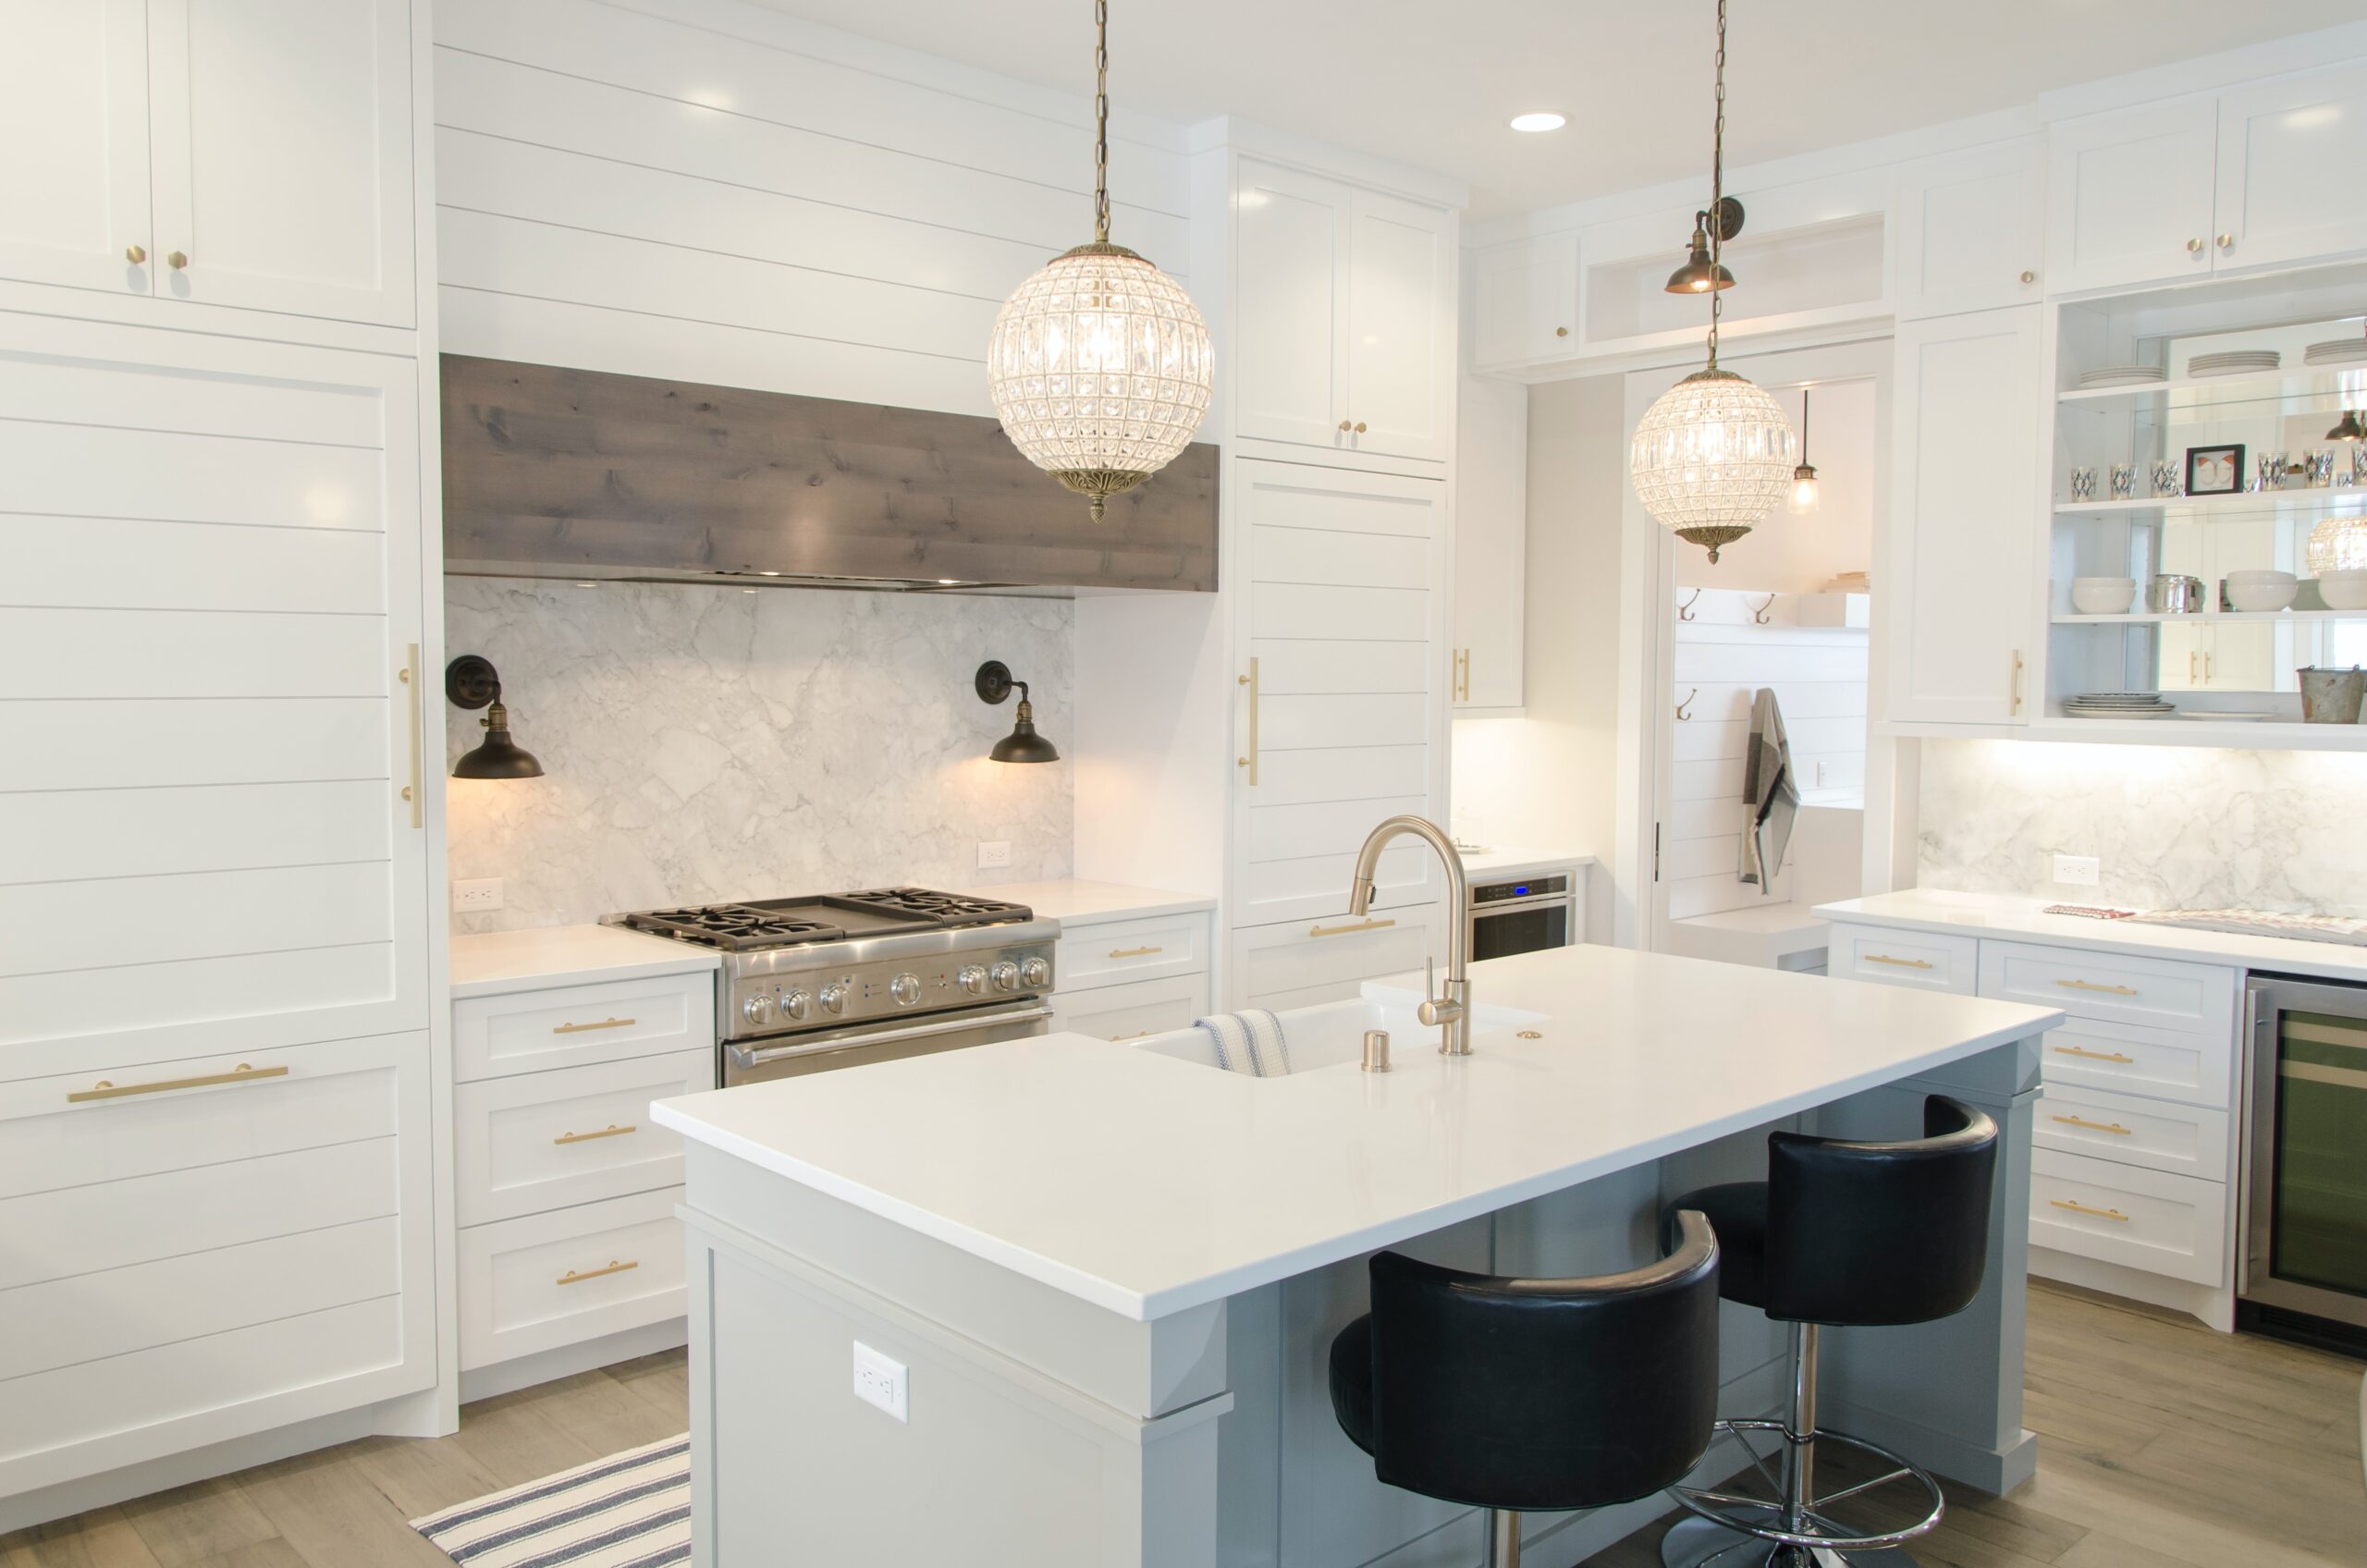 How to Choose the Best Light Fixtures For Your Kitchen